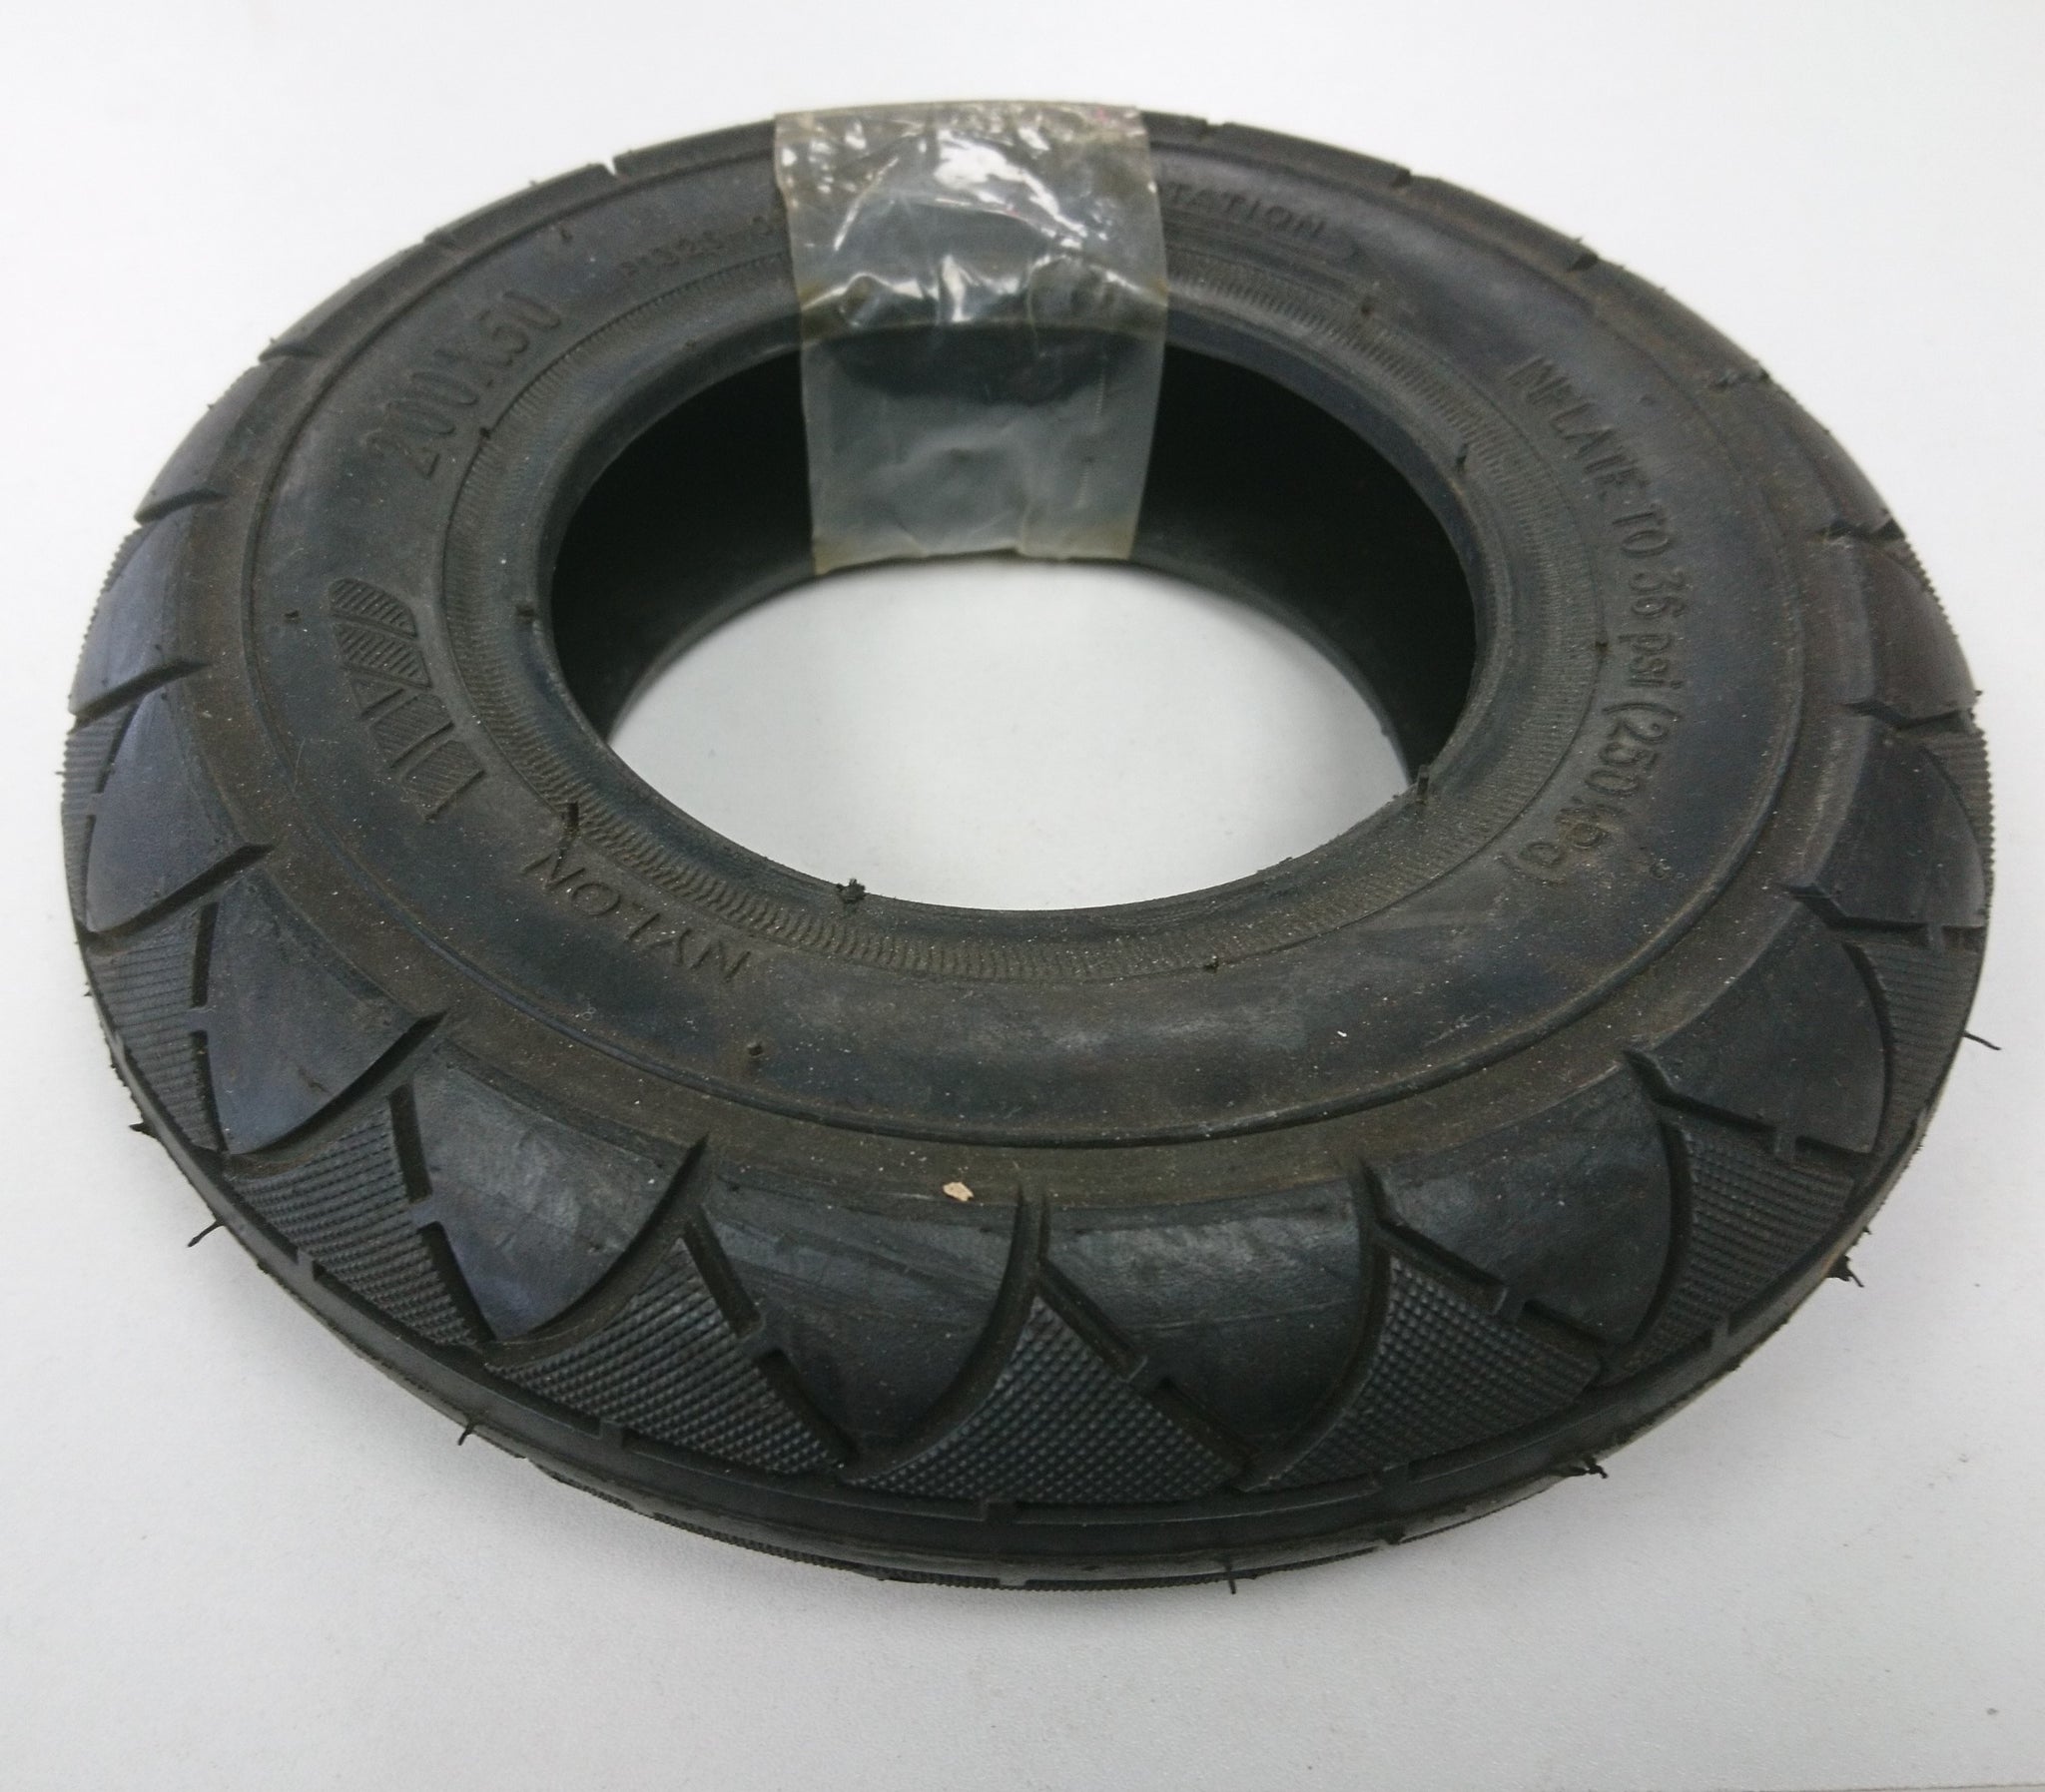 Speedway Mini Scooter Tyre front 200x50